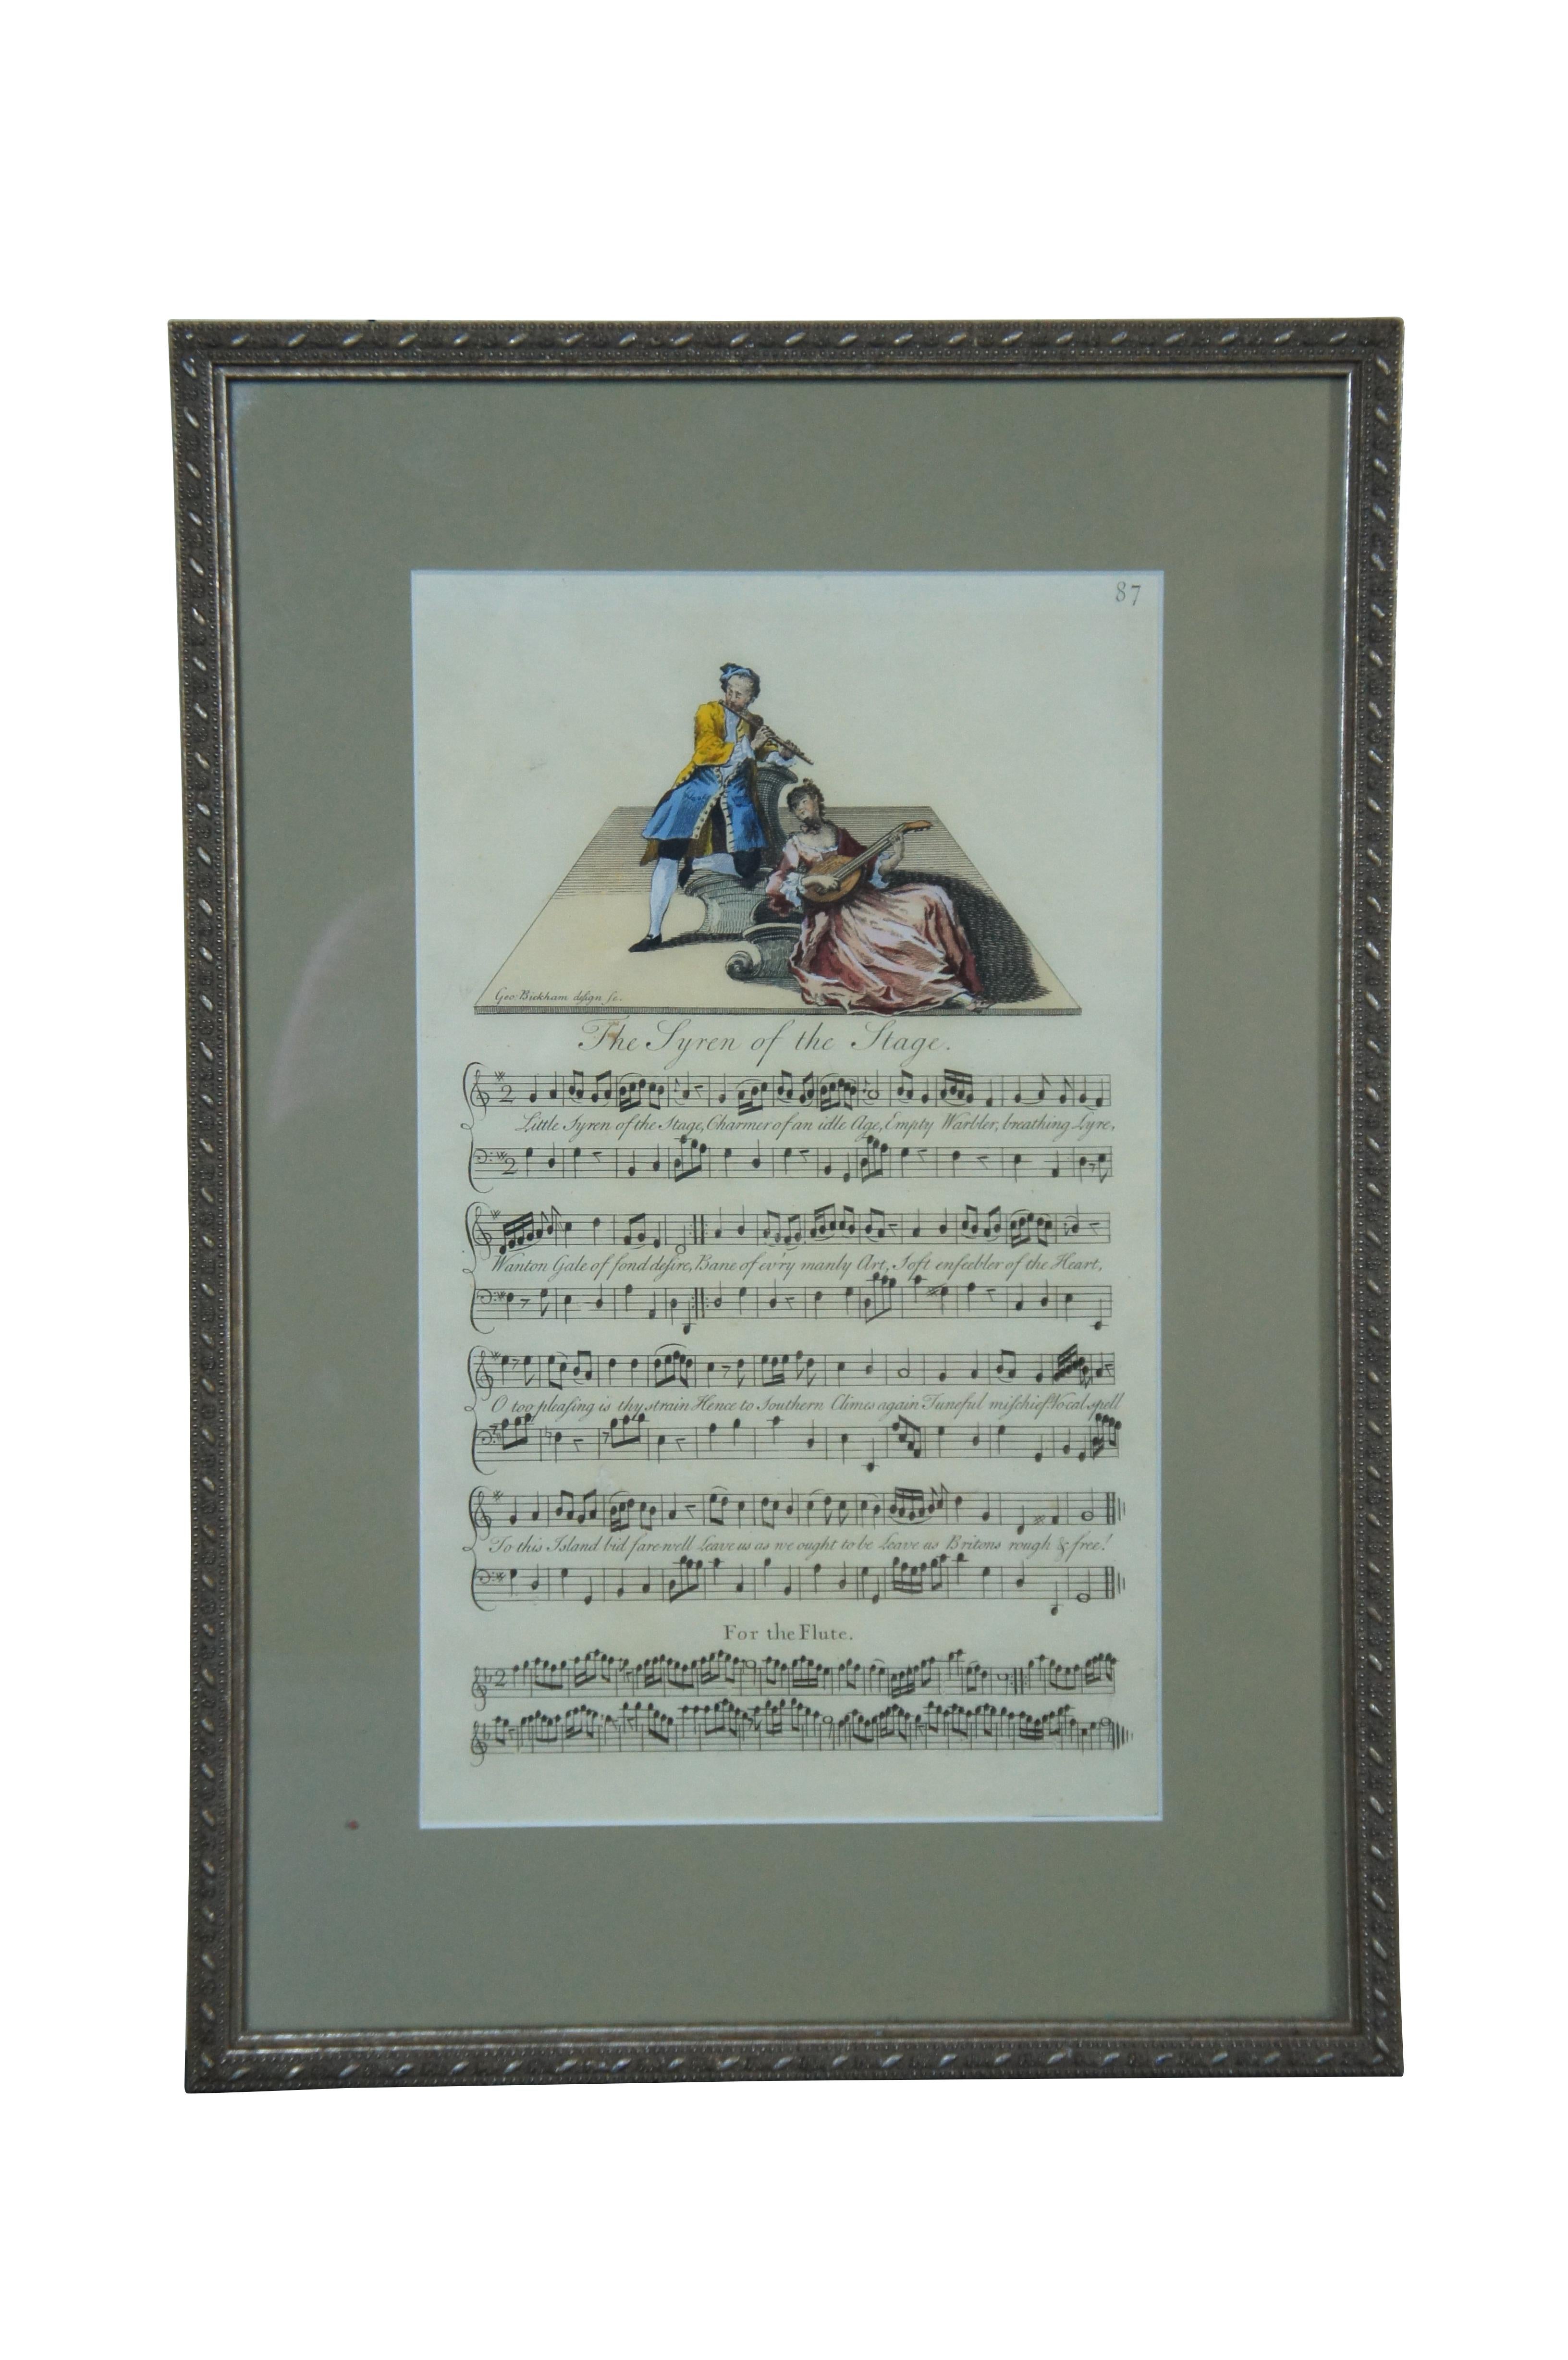 Pair of mid 18th century (1740s) colored sheets of music illustrated by George Bickham - The Syren of the Stage, showing a male and female pair of figures playing flute and mandolin, and Love's Bacchanal, showing a pair of male figures on an elegant